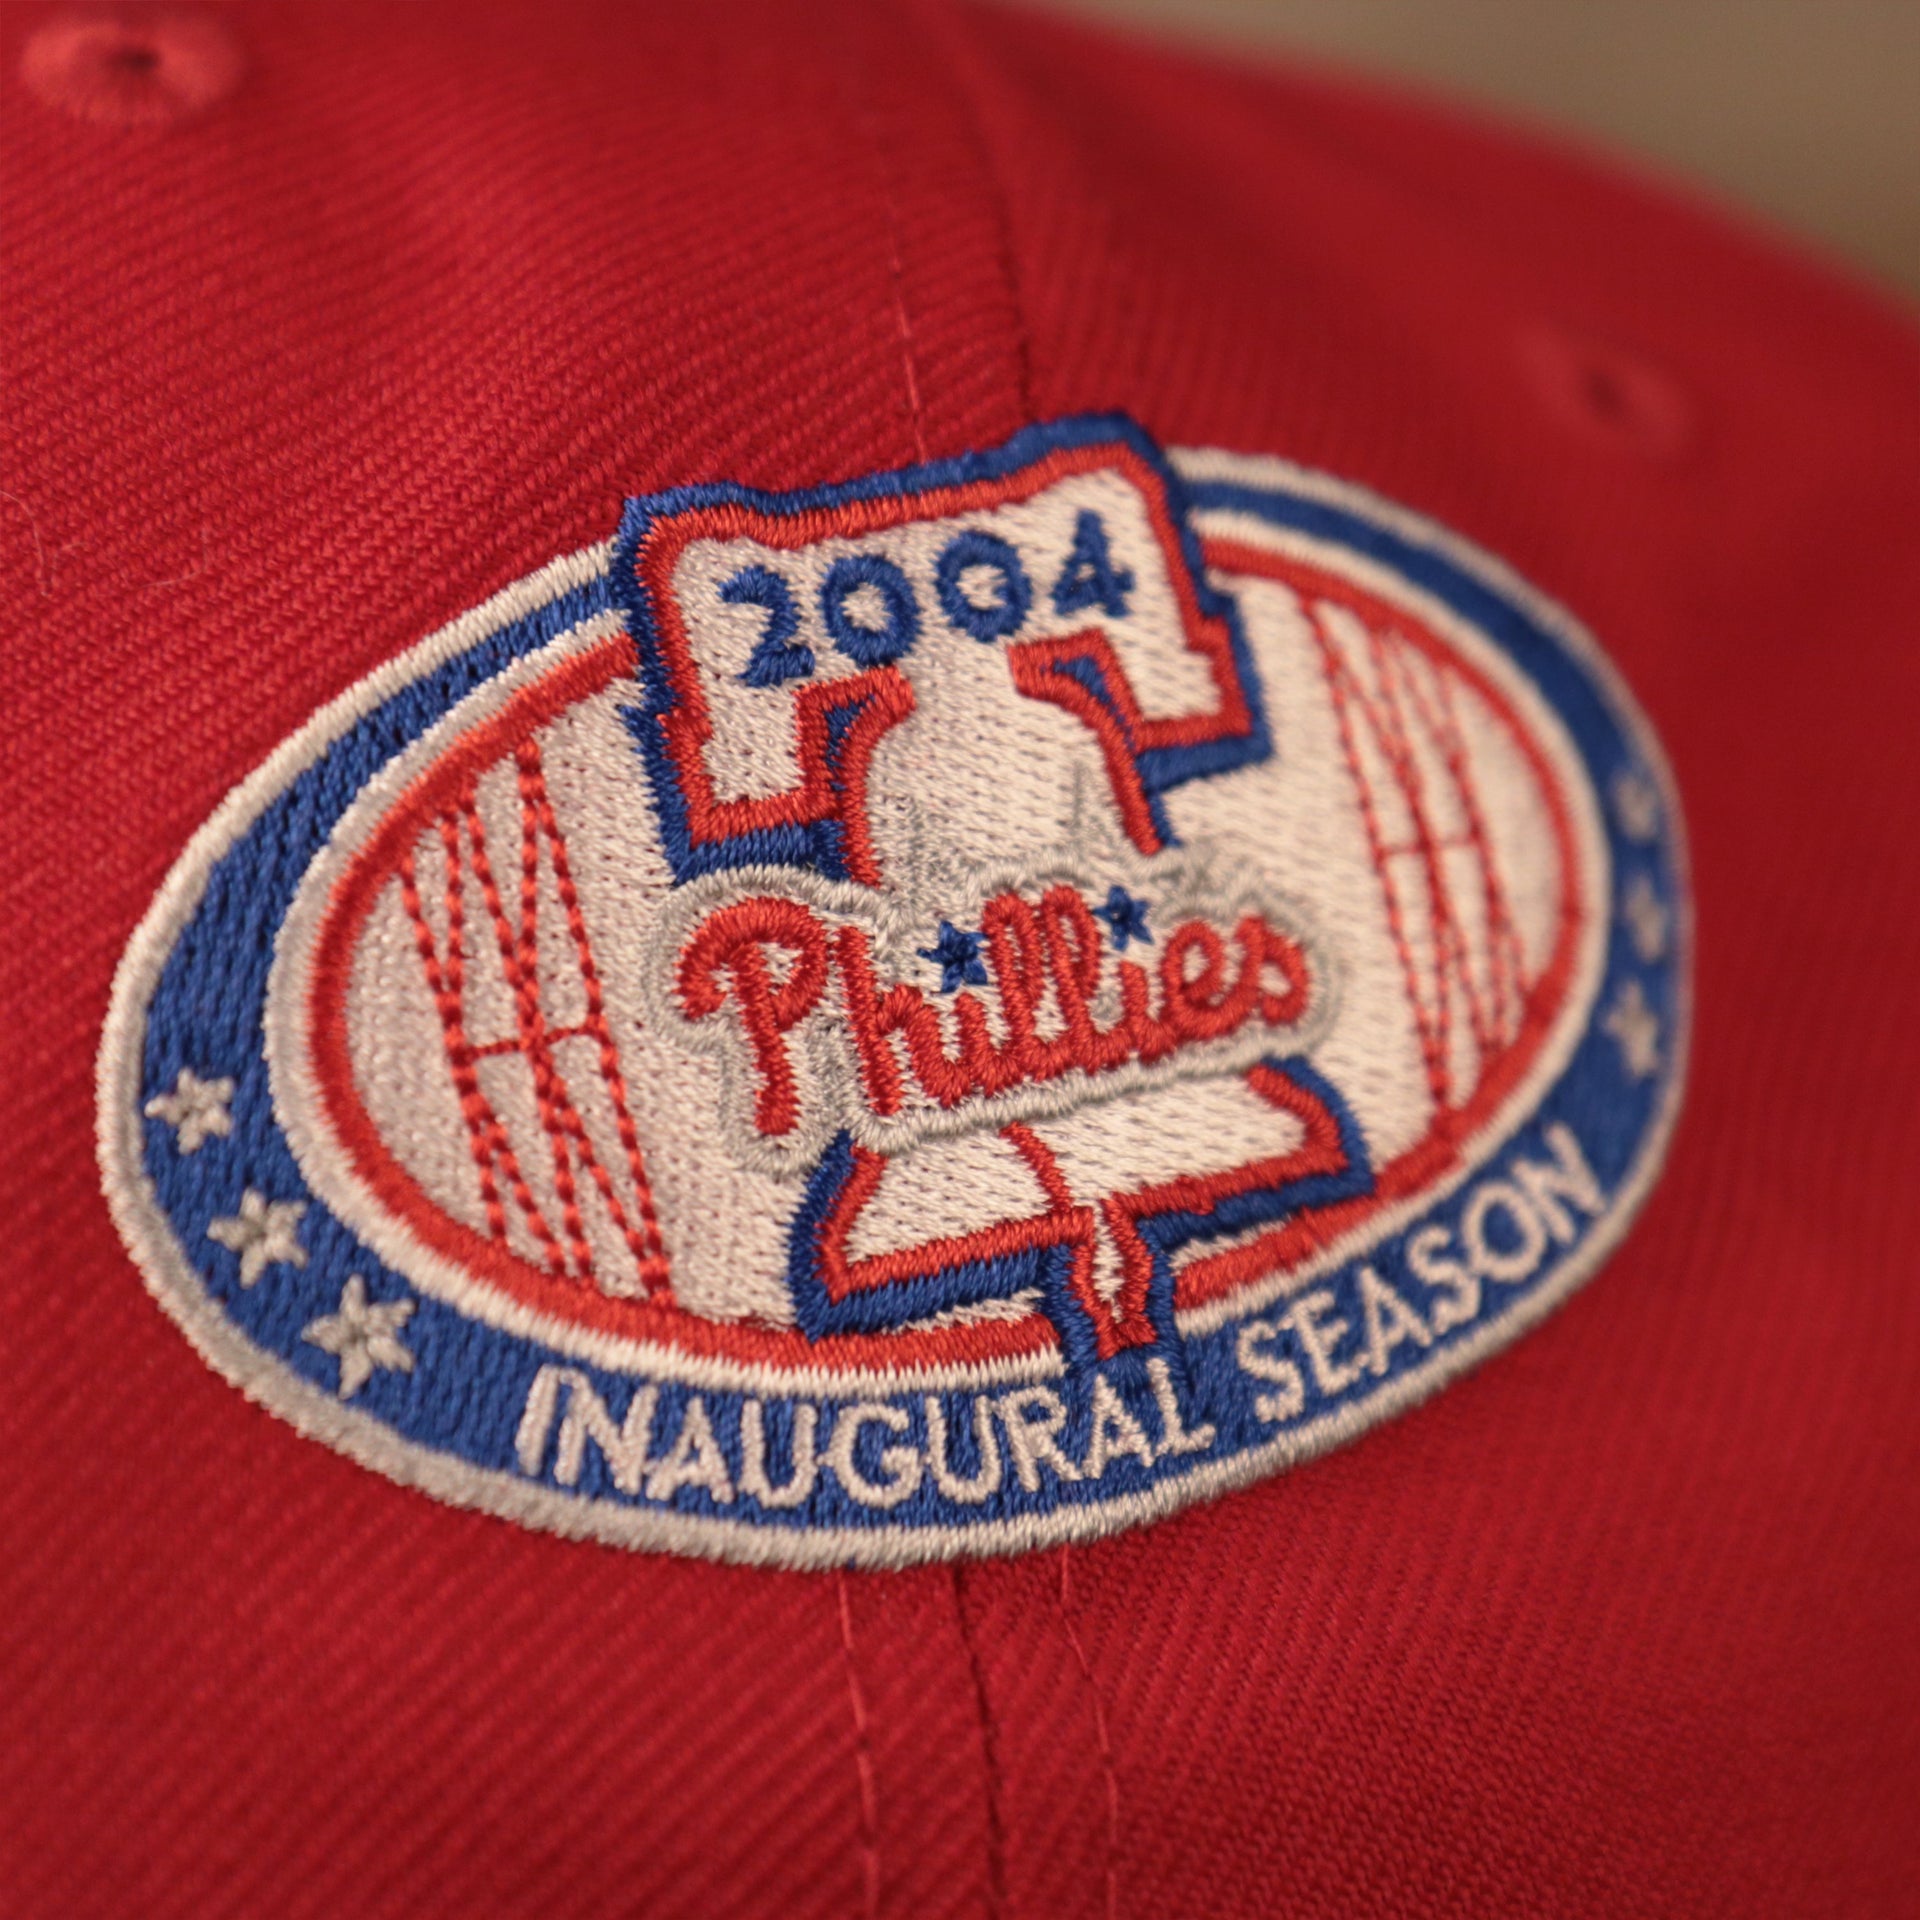 The 2004 inaugral season patch on the red all over fitted hat by New Era.